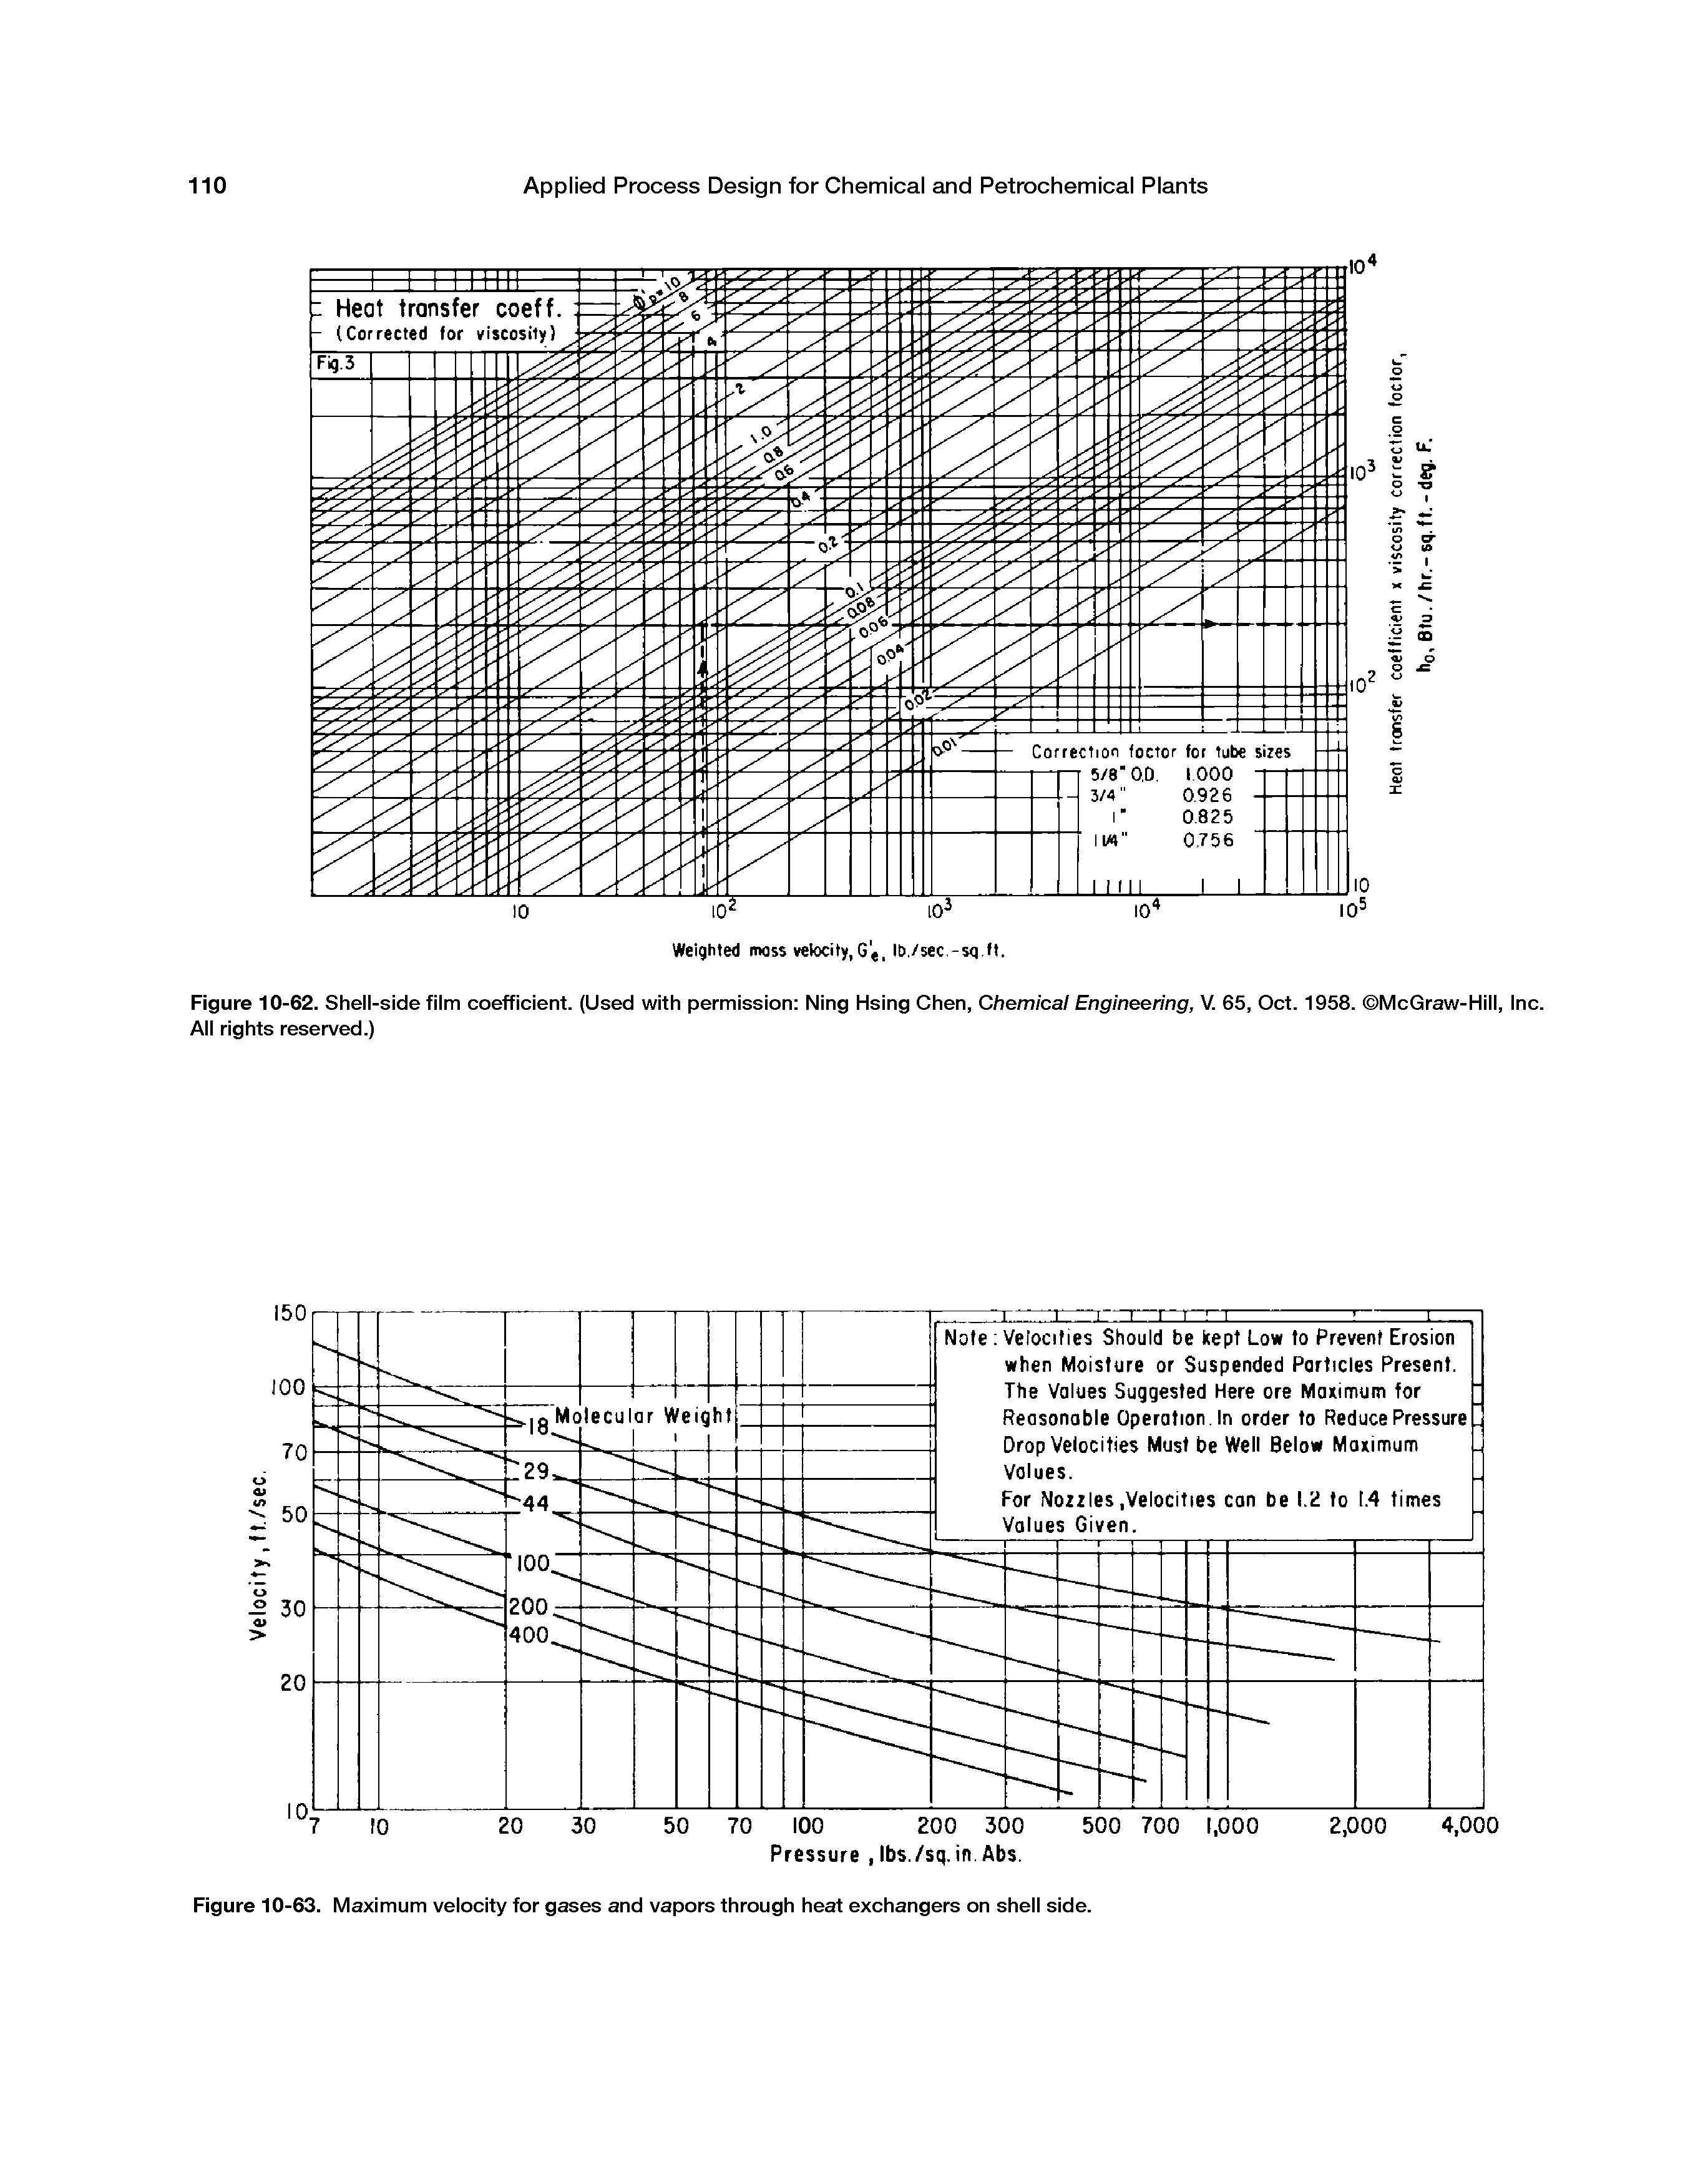 Figure 10-63. Maximum velocity for gases and vapors through heat exchangers on shell side.